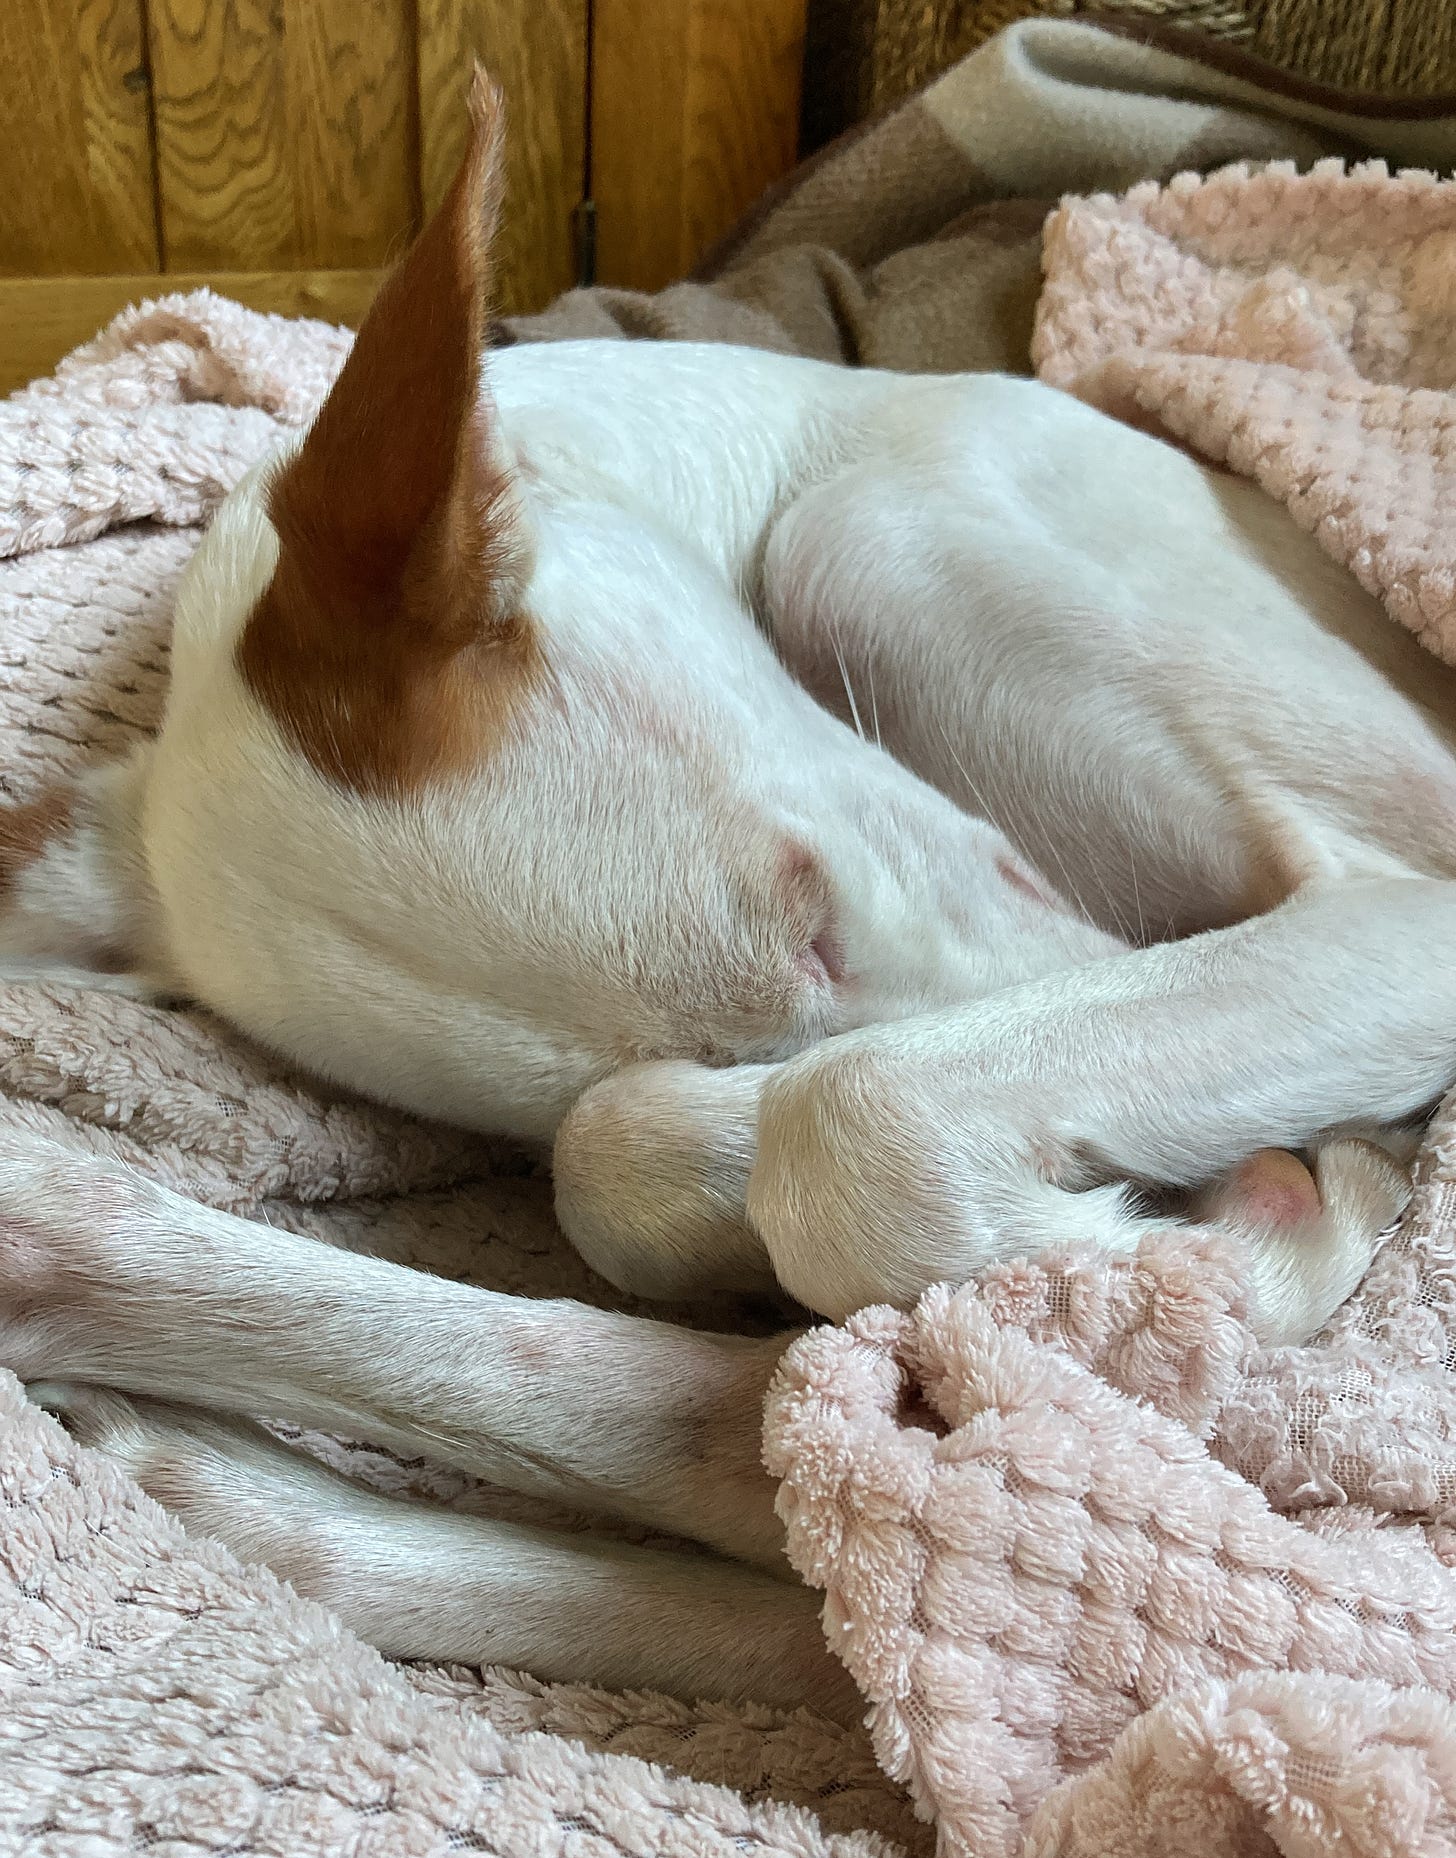 Photograph of a skinny white podenco dog with brown ears. She's curling up - a bundle of limbs, her eyes closed. She's wrapped in a pink blanket.